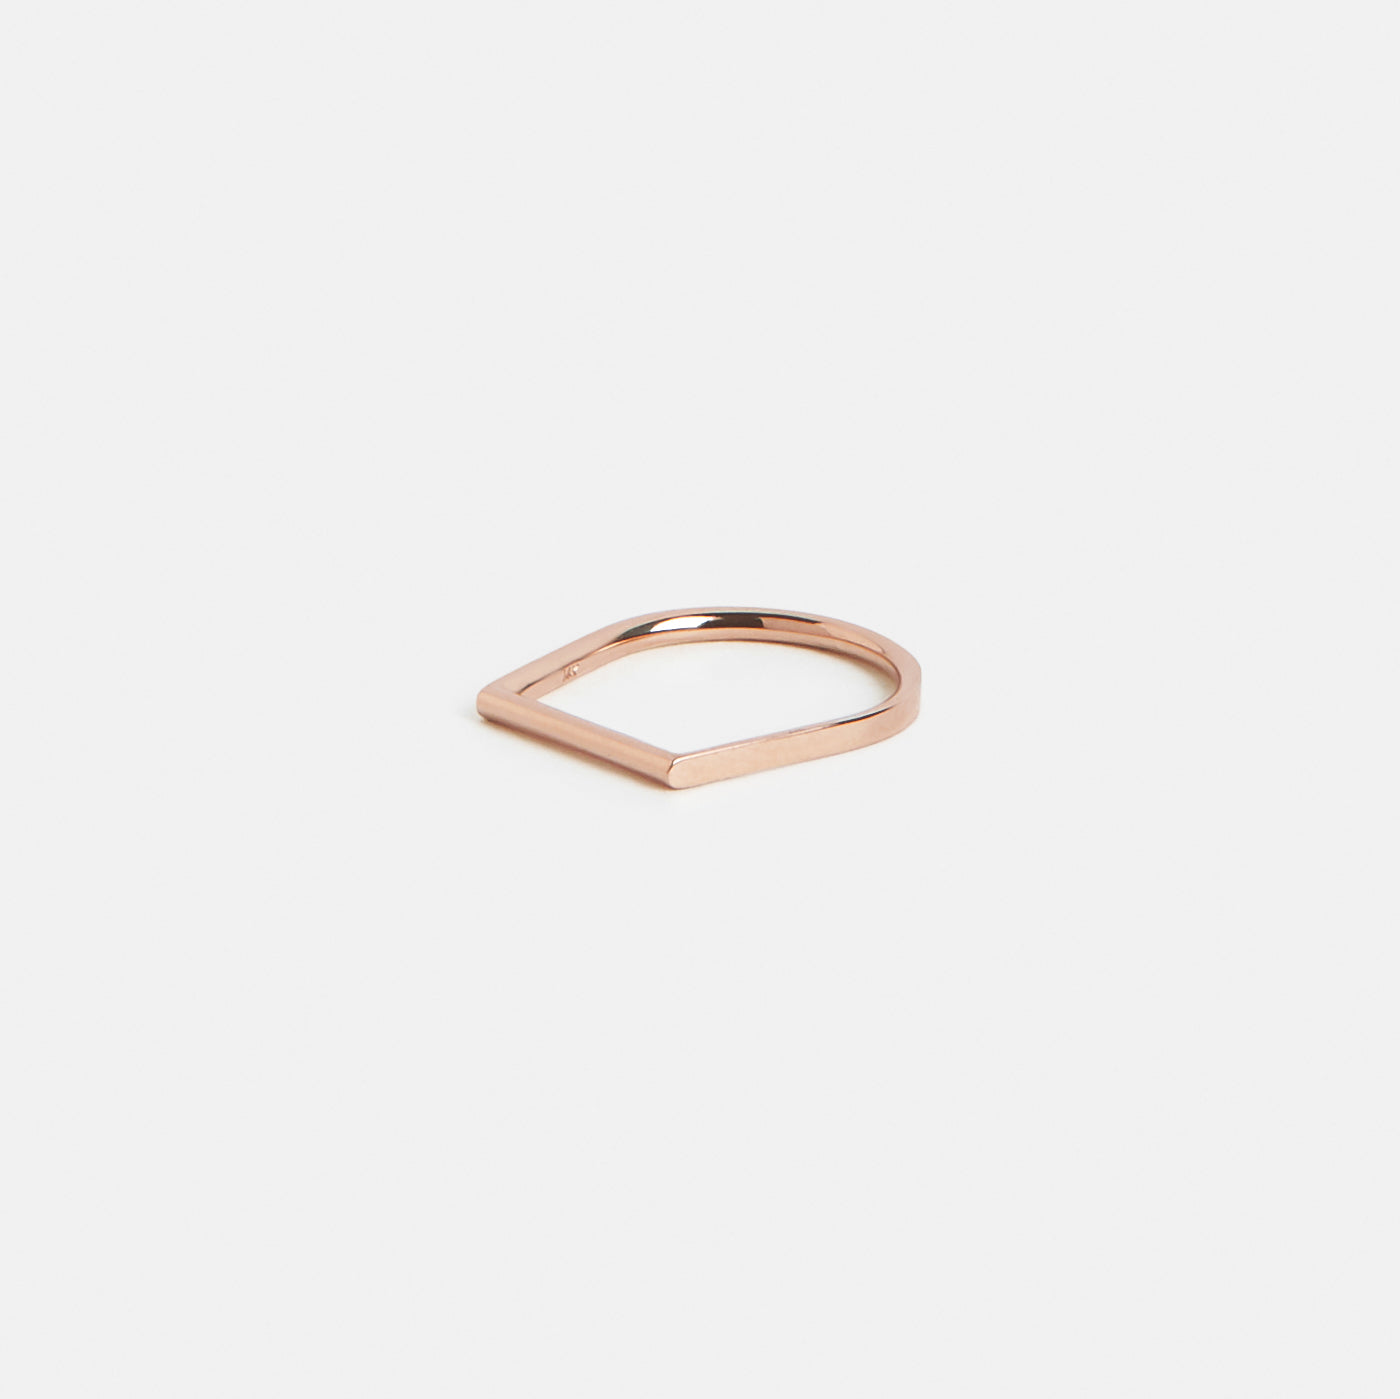 Lina Non-Traditional Ring in 14k Rose Gold By SHW Fine Jewelry NYC